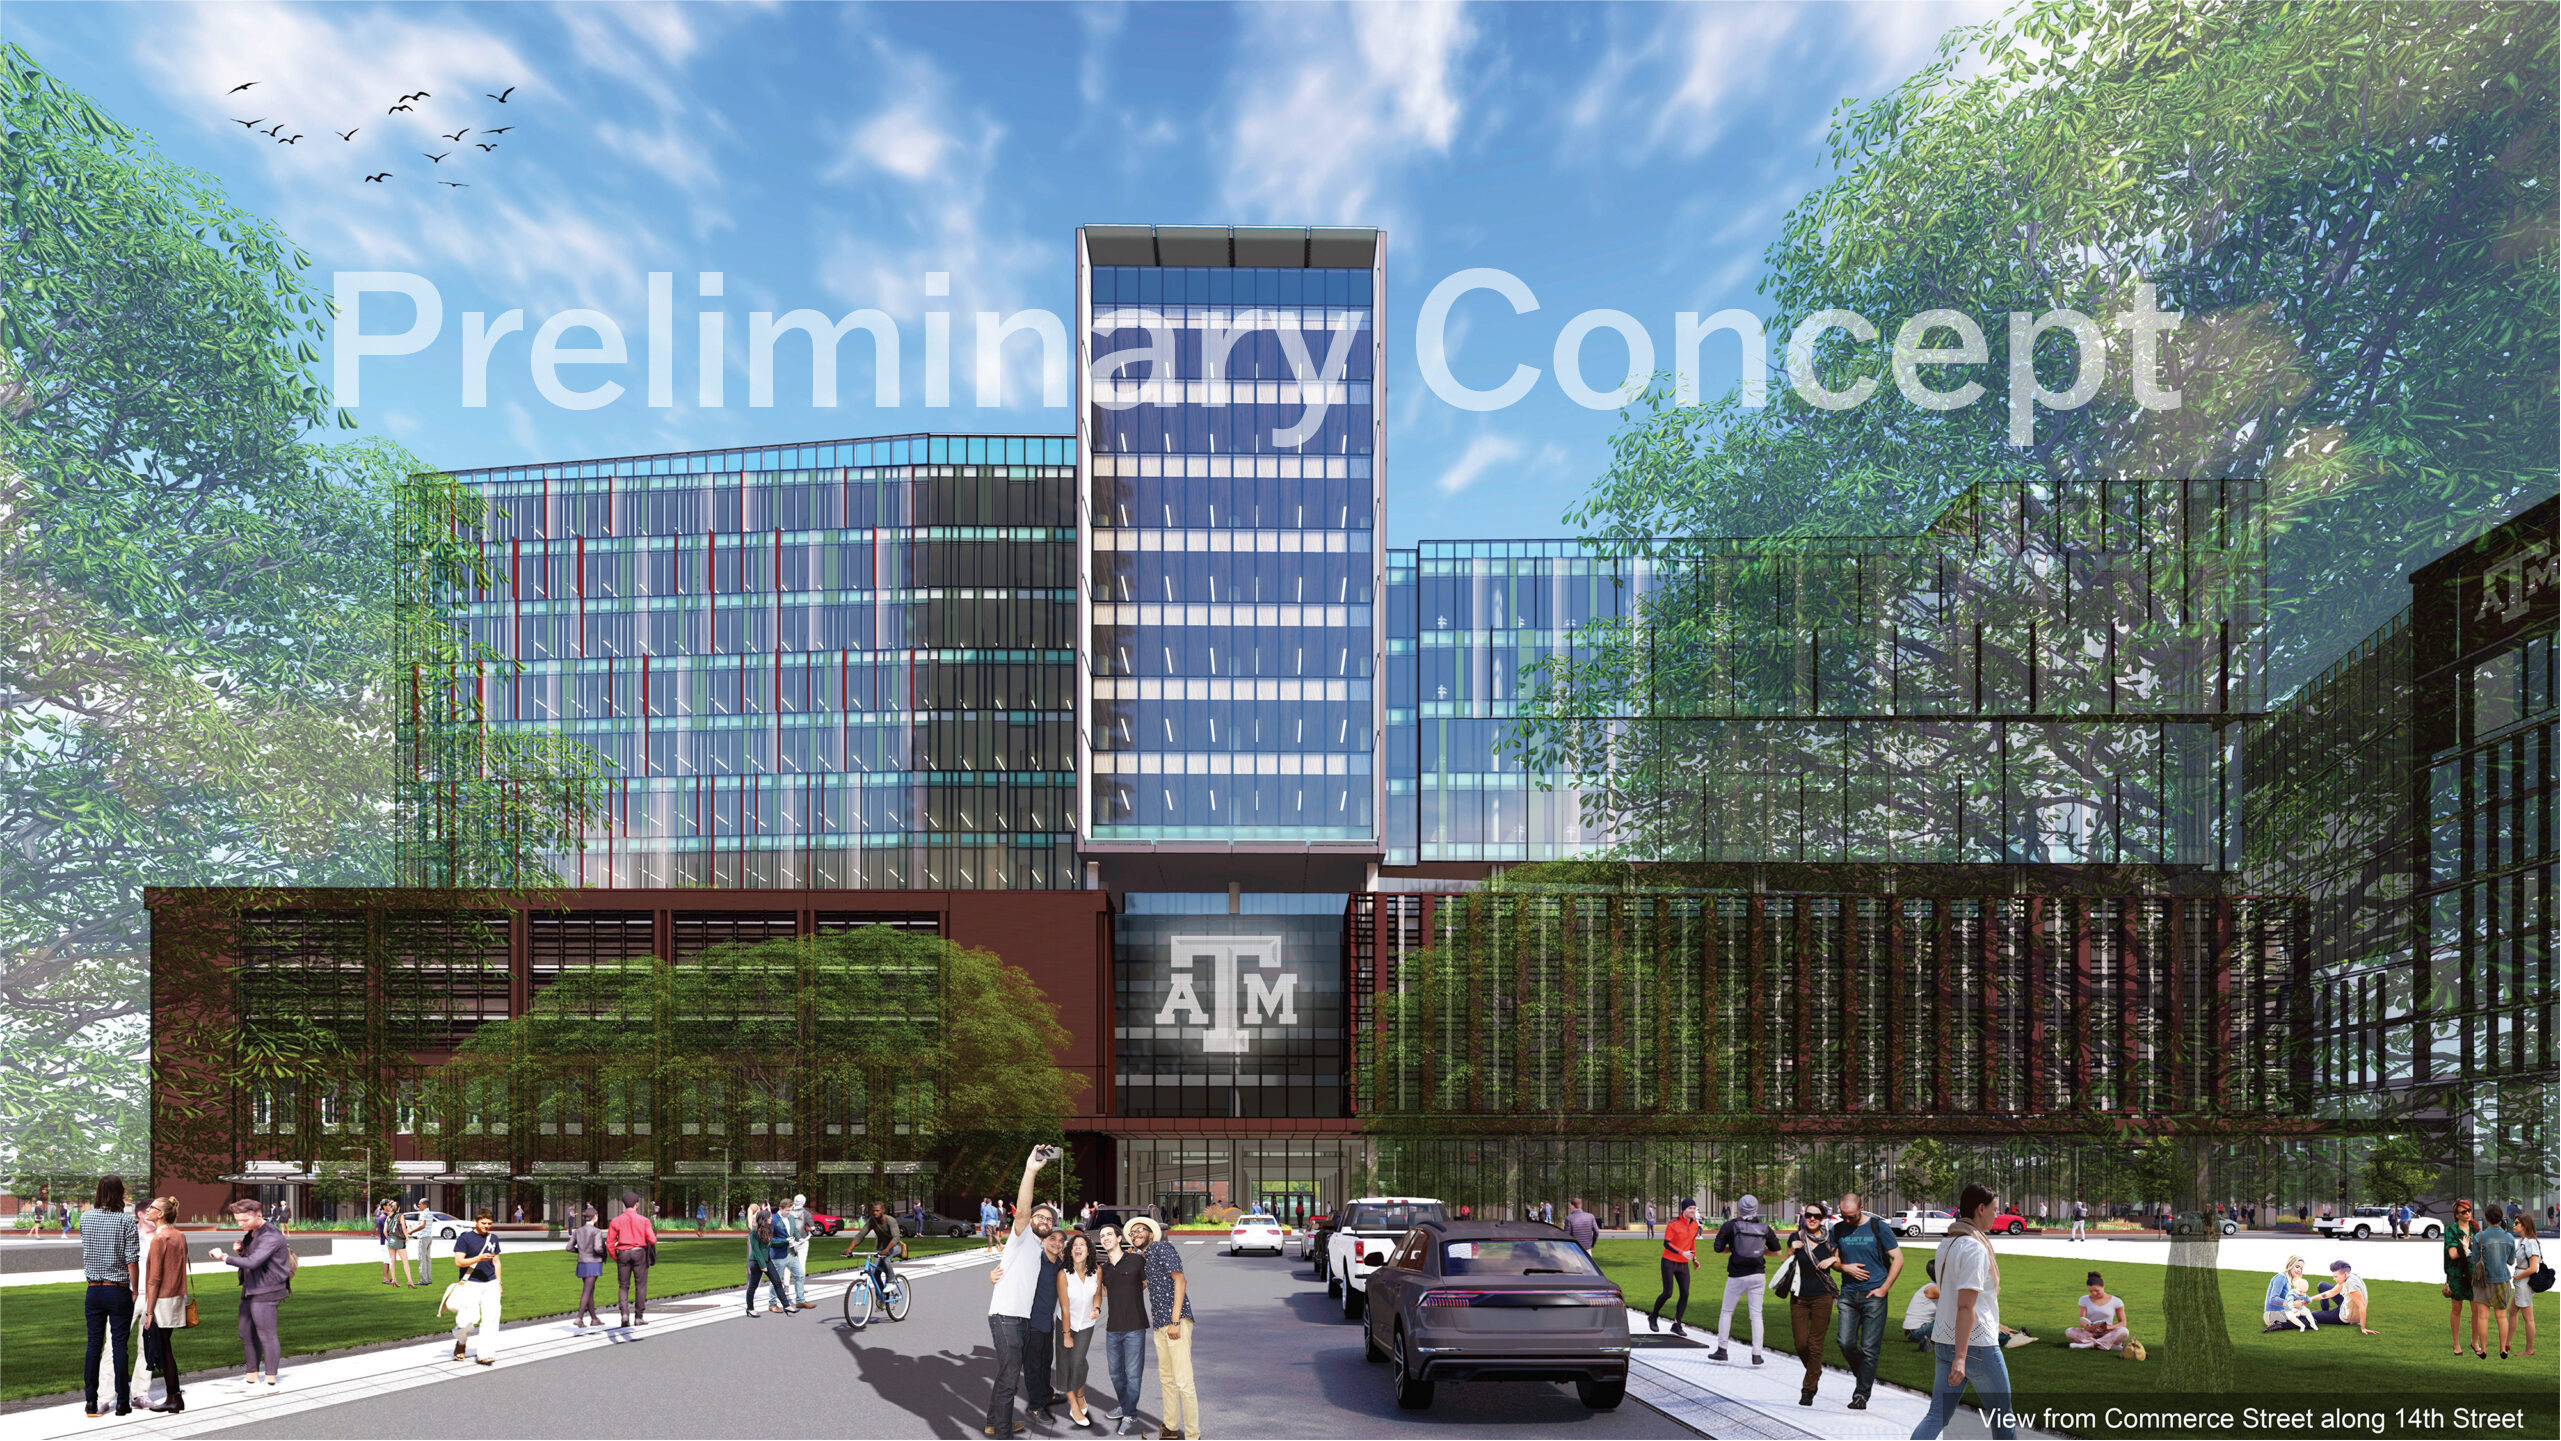 Artist's rendering of the preliminary concept for the Research and Innovation building from Commerce Street along 14th Street of the Texas A&M-Fort Worth campus.